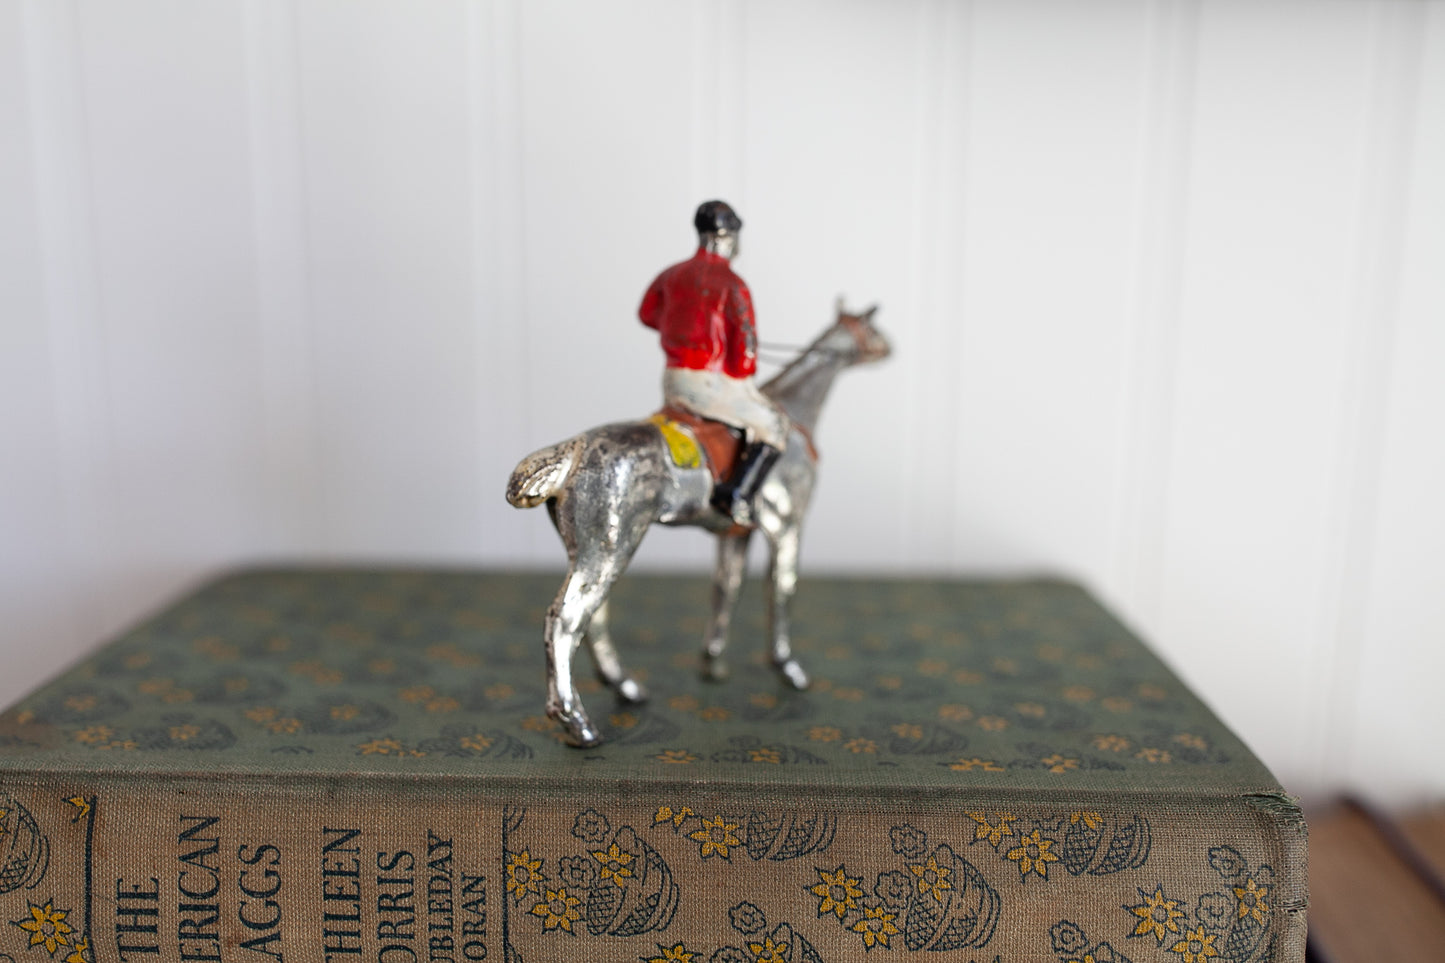 Vintage Japan Cast Iron Lead Silver Painted Horse &Jockey Childs Play Toy Figure - 3.25" tall